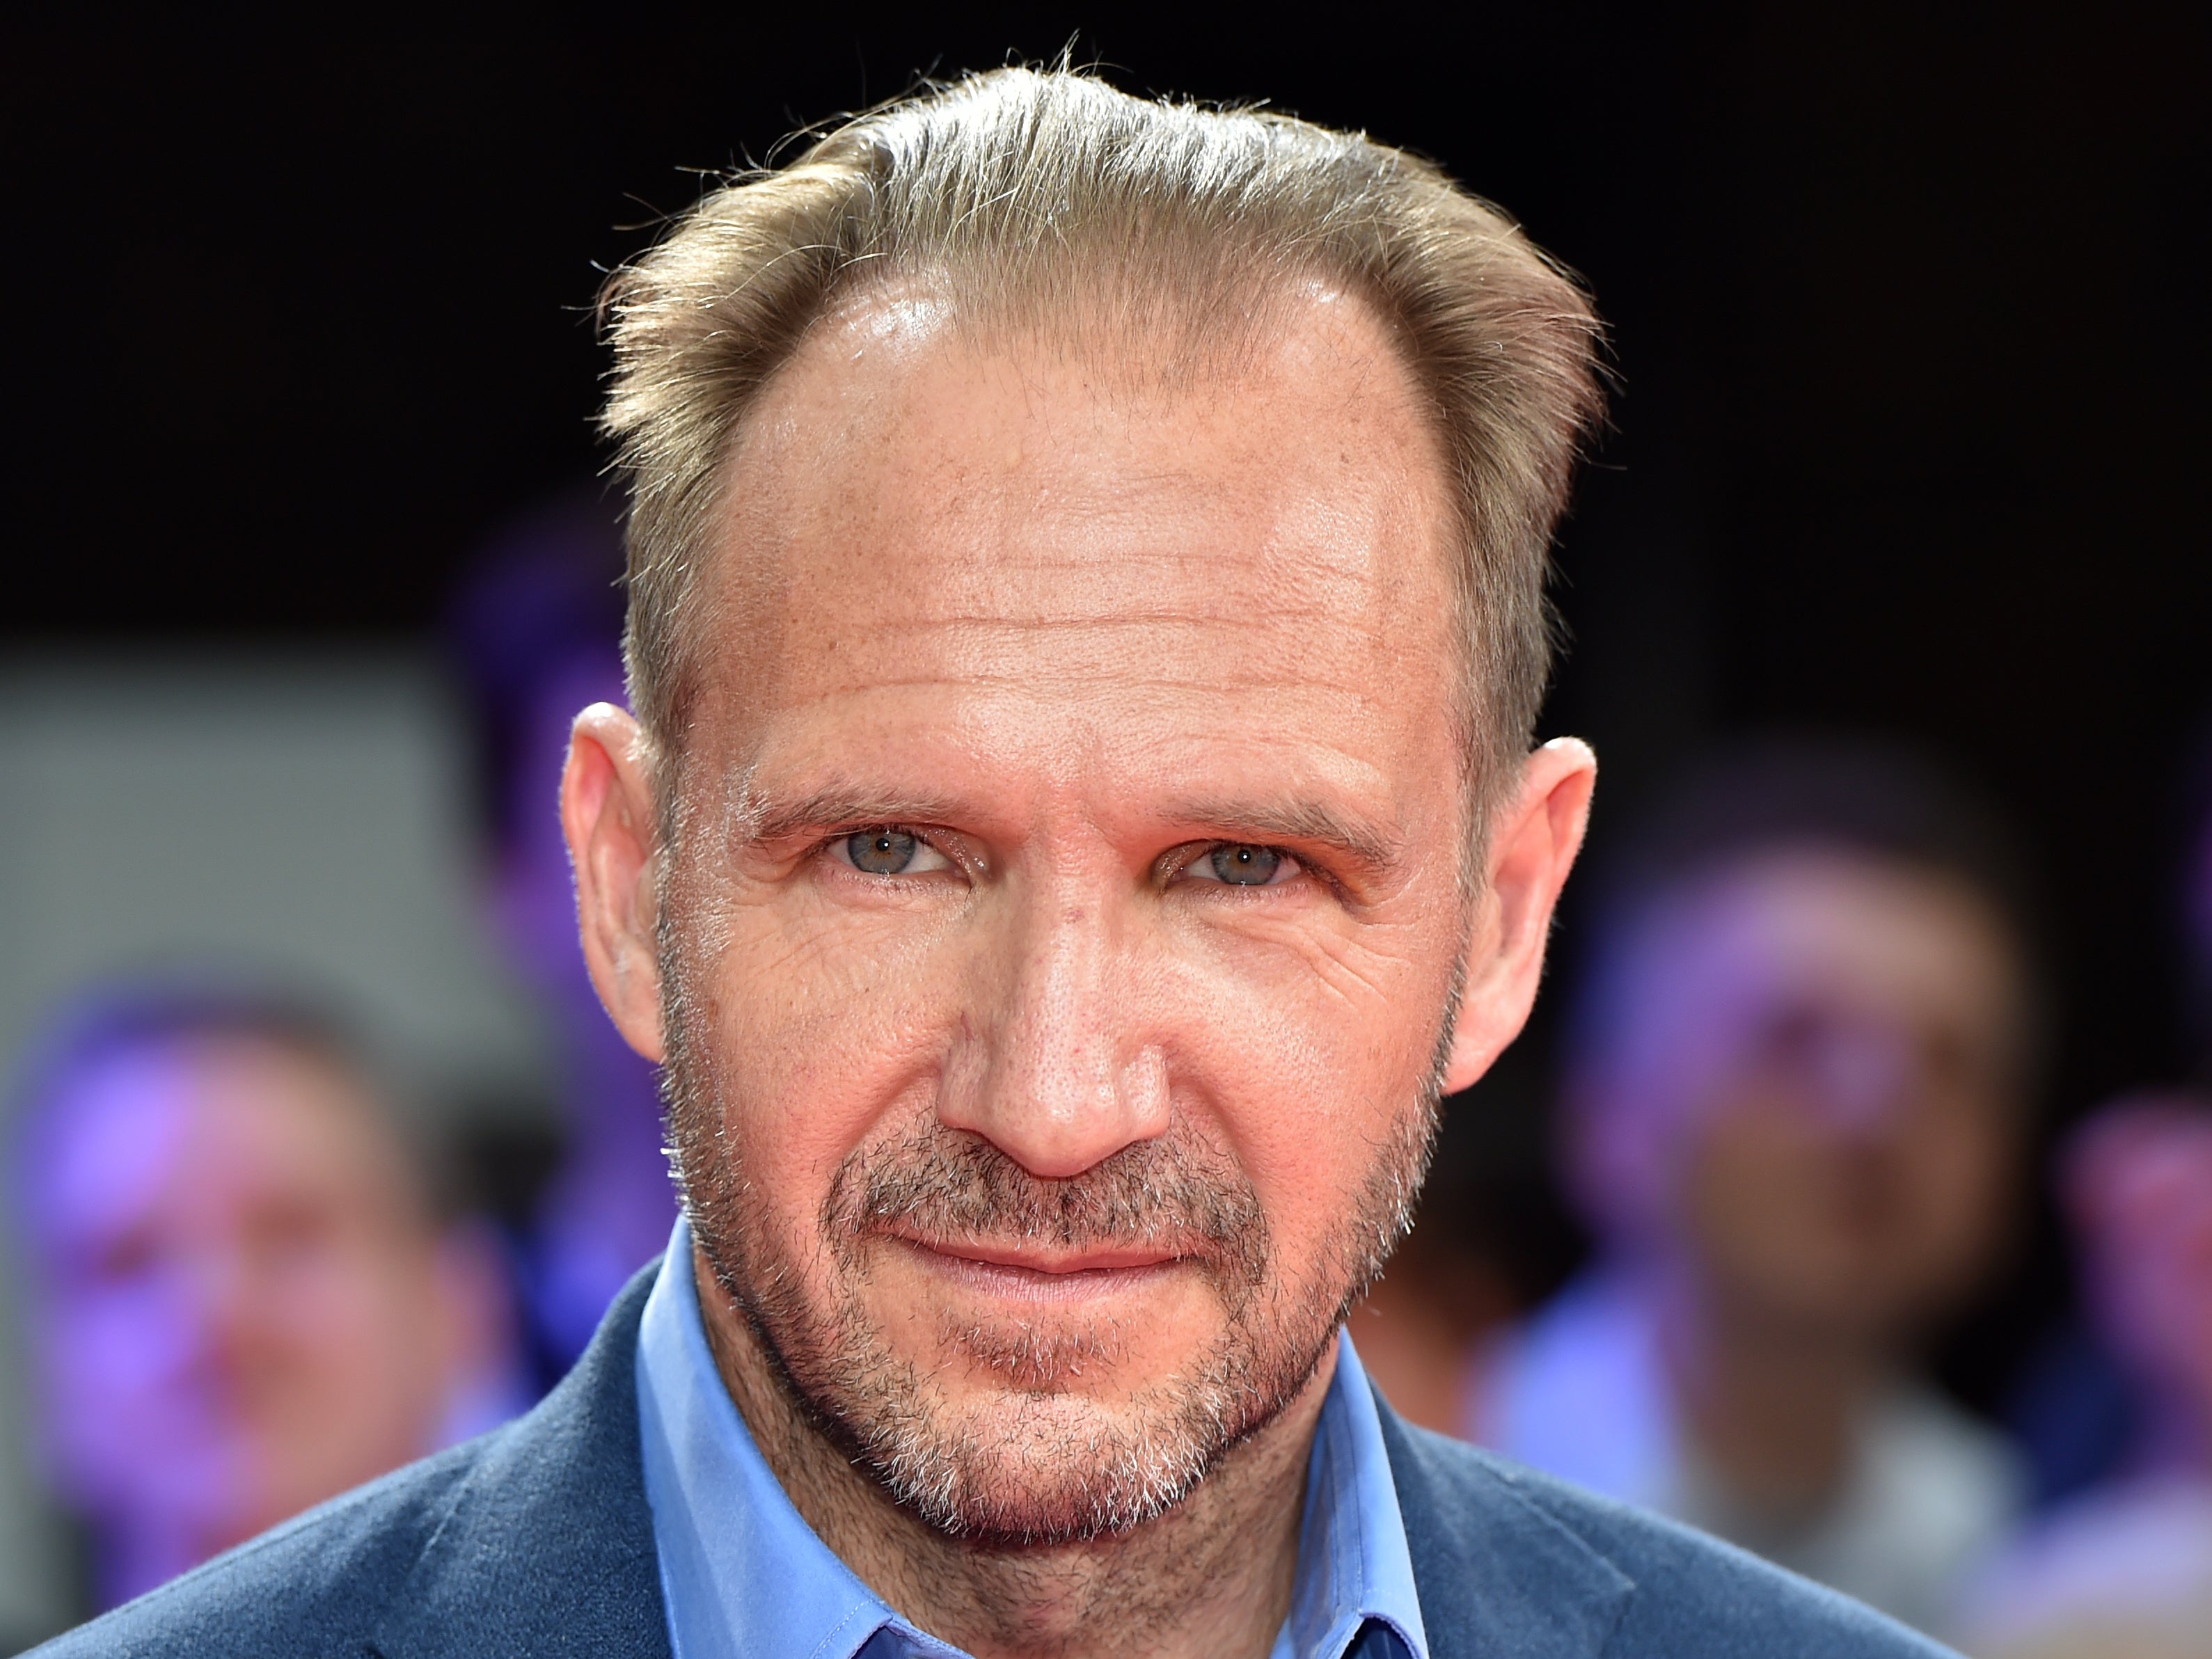 Ralph Fiennes will direct and star in an adaptation of TS Eliot’s Four Quartets